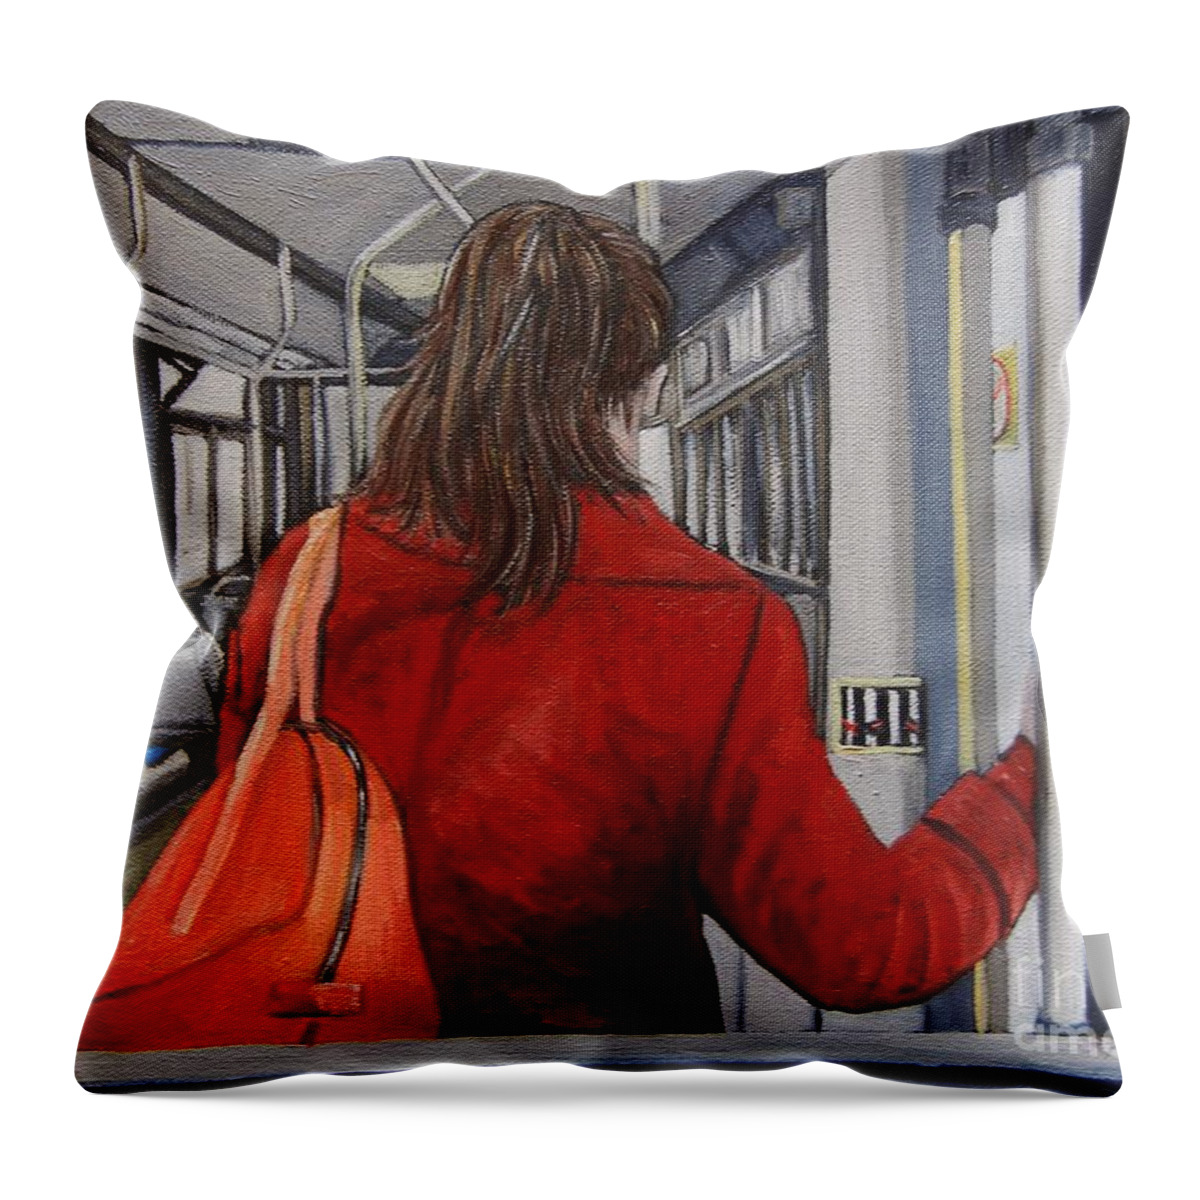 Bus Scenes Throw Pillow featuring the painting The Red Coat by Reb Frost